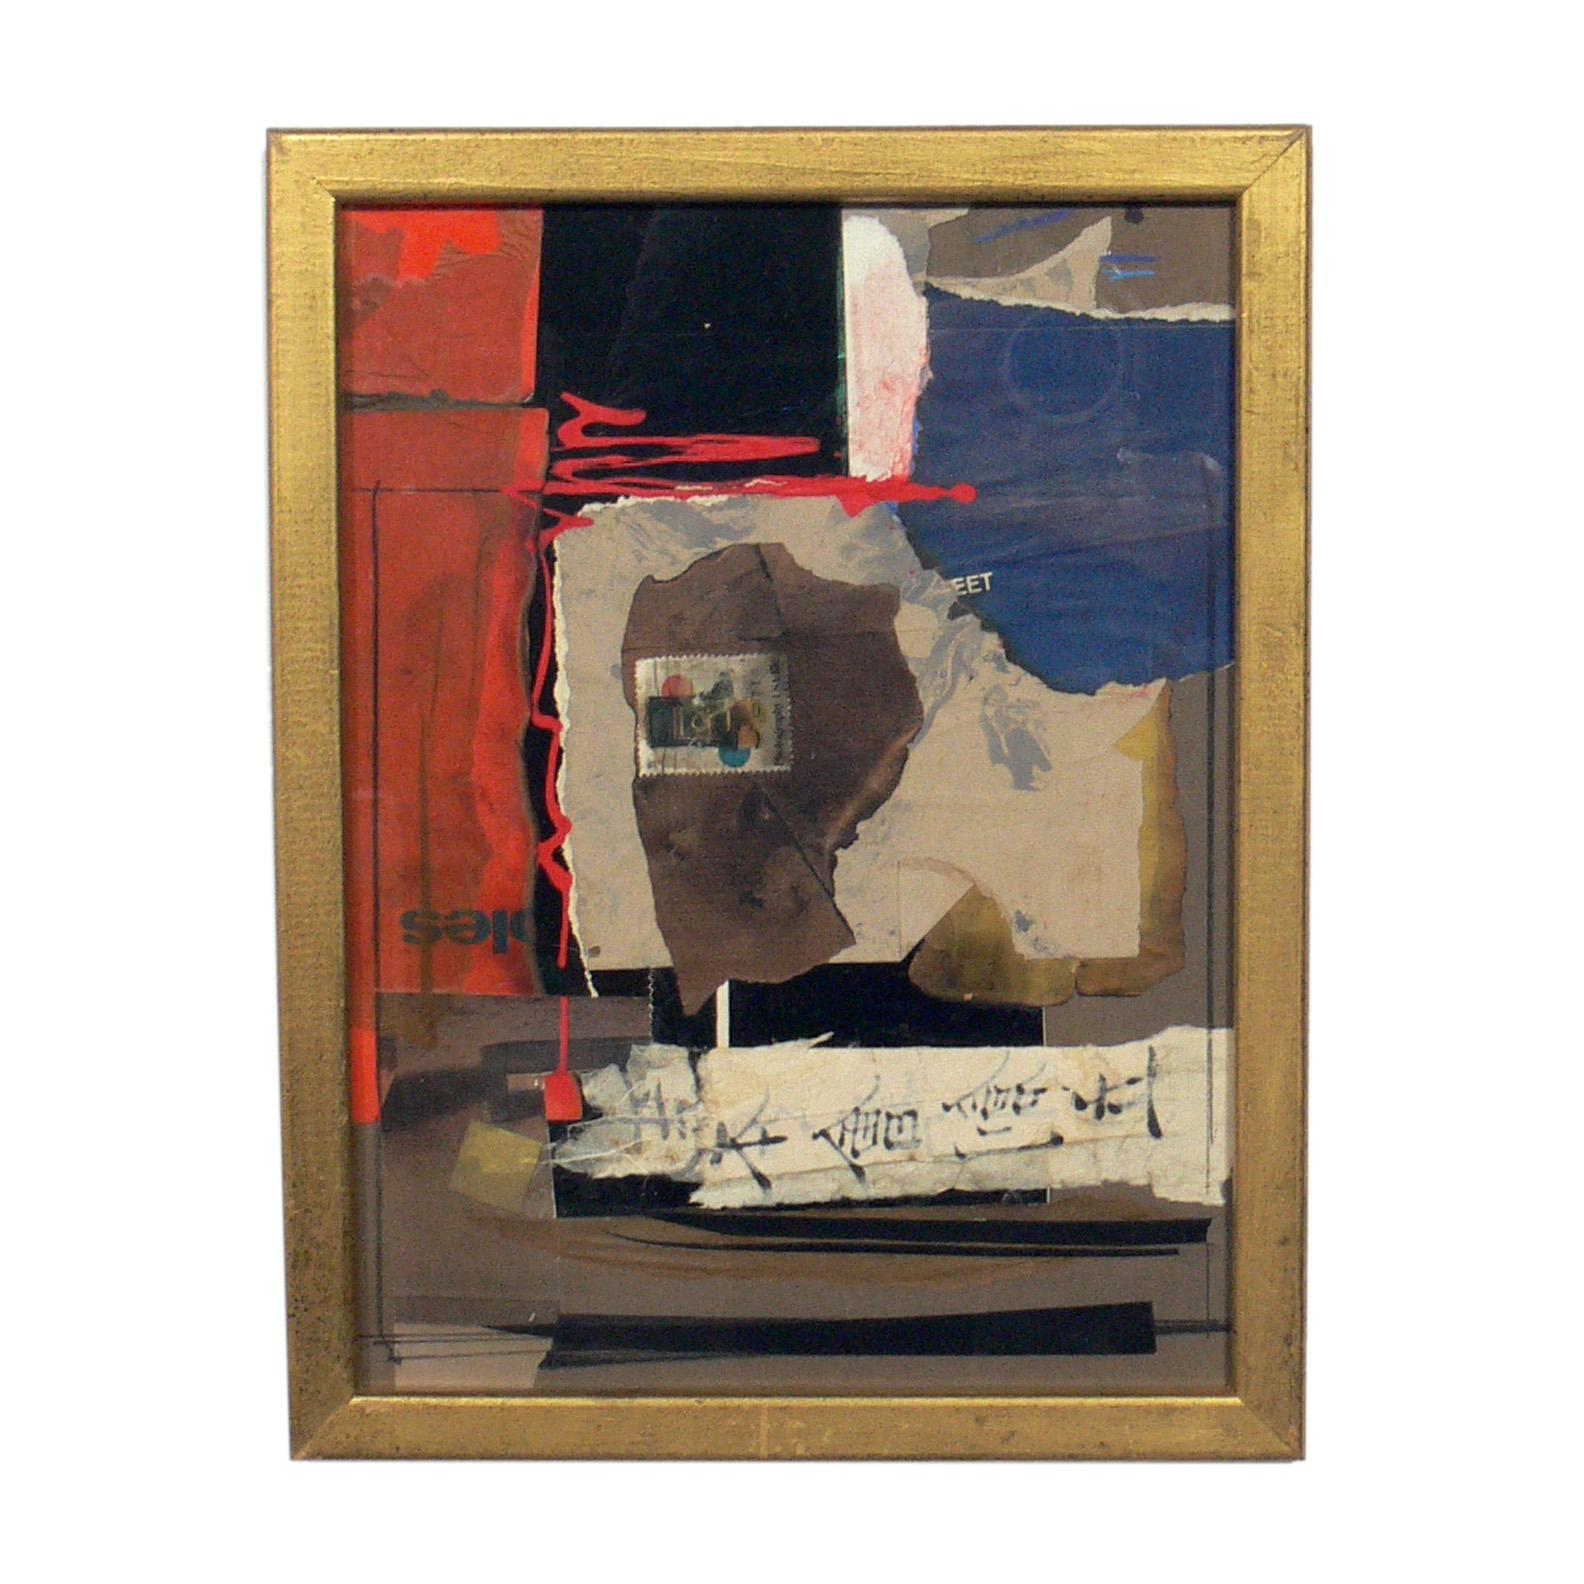 Selection of abstract paintings, circa 1960s. They are:
1) Mixed media collage painting pictured on top, unsigned. It measures 13.75